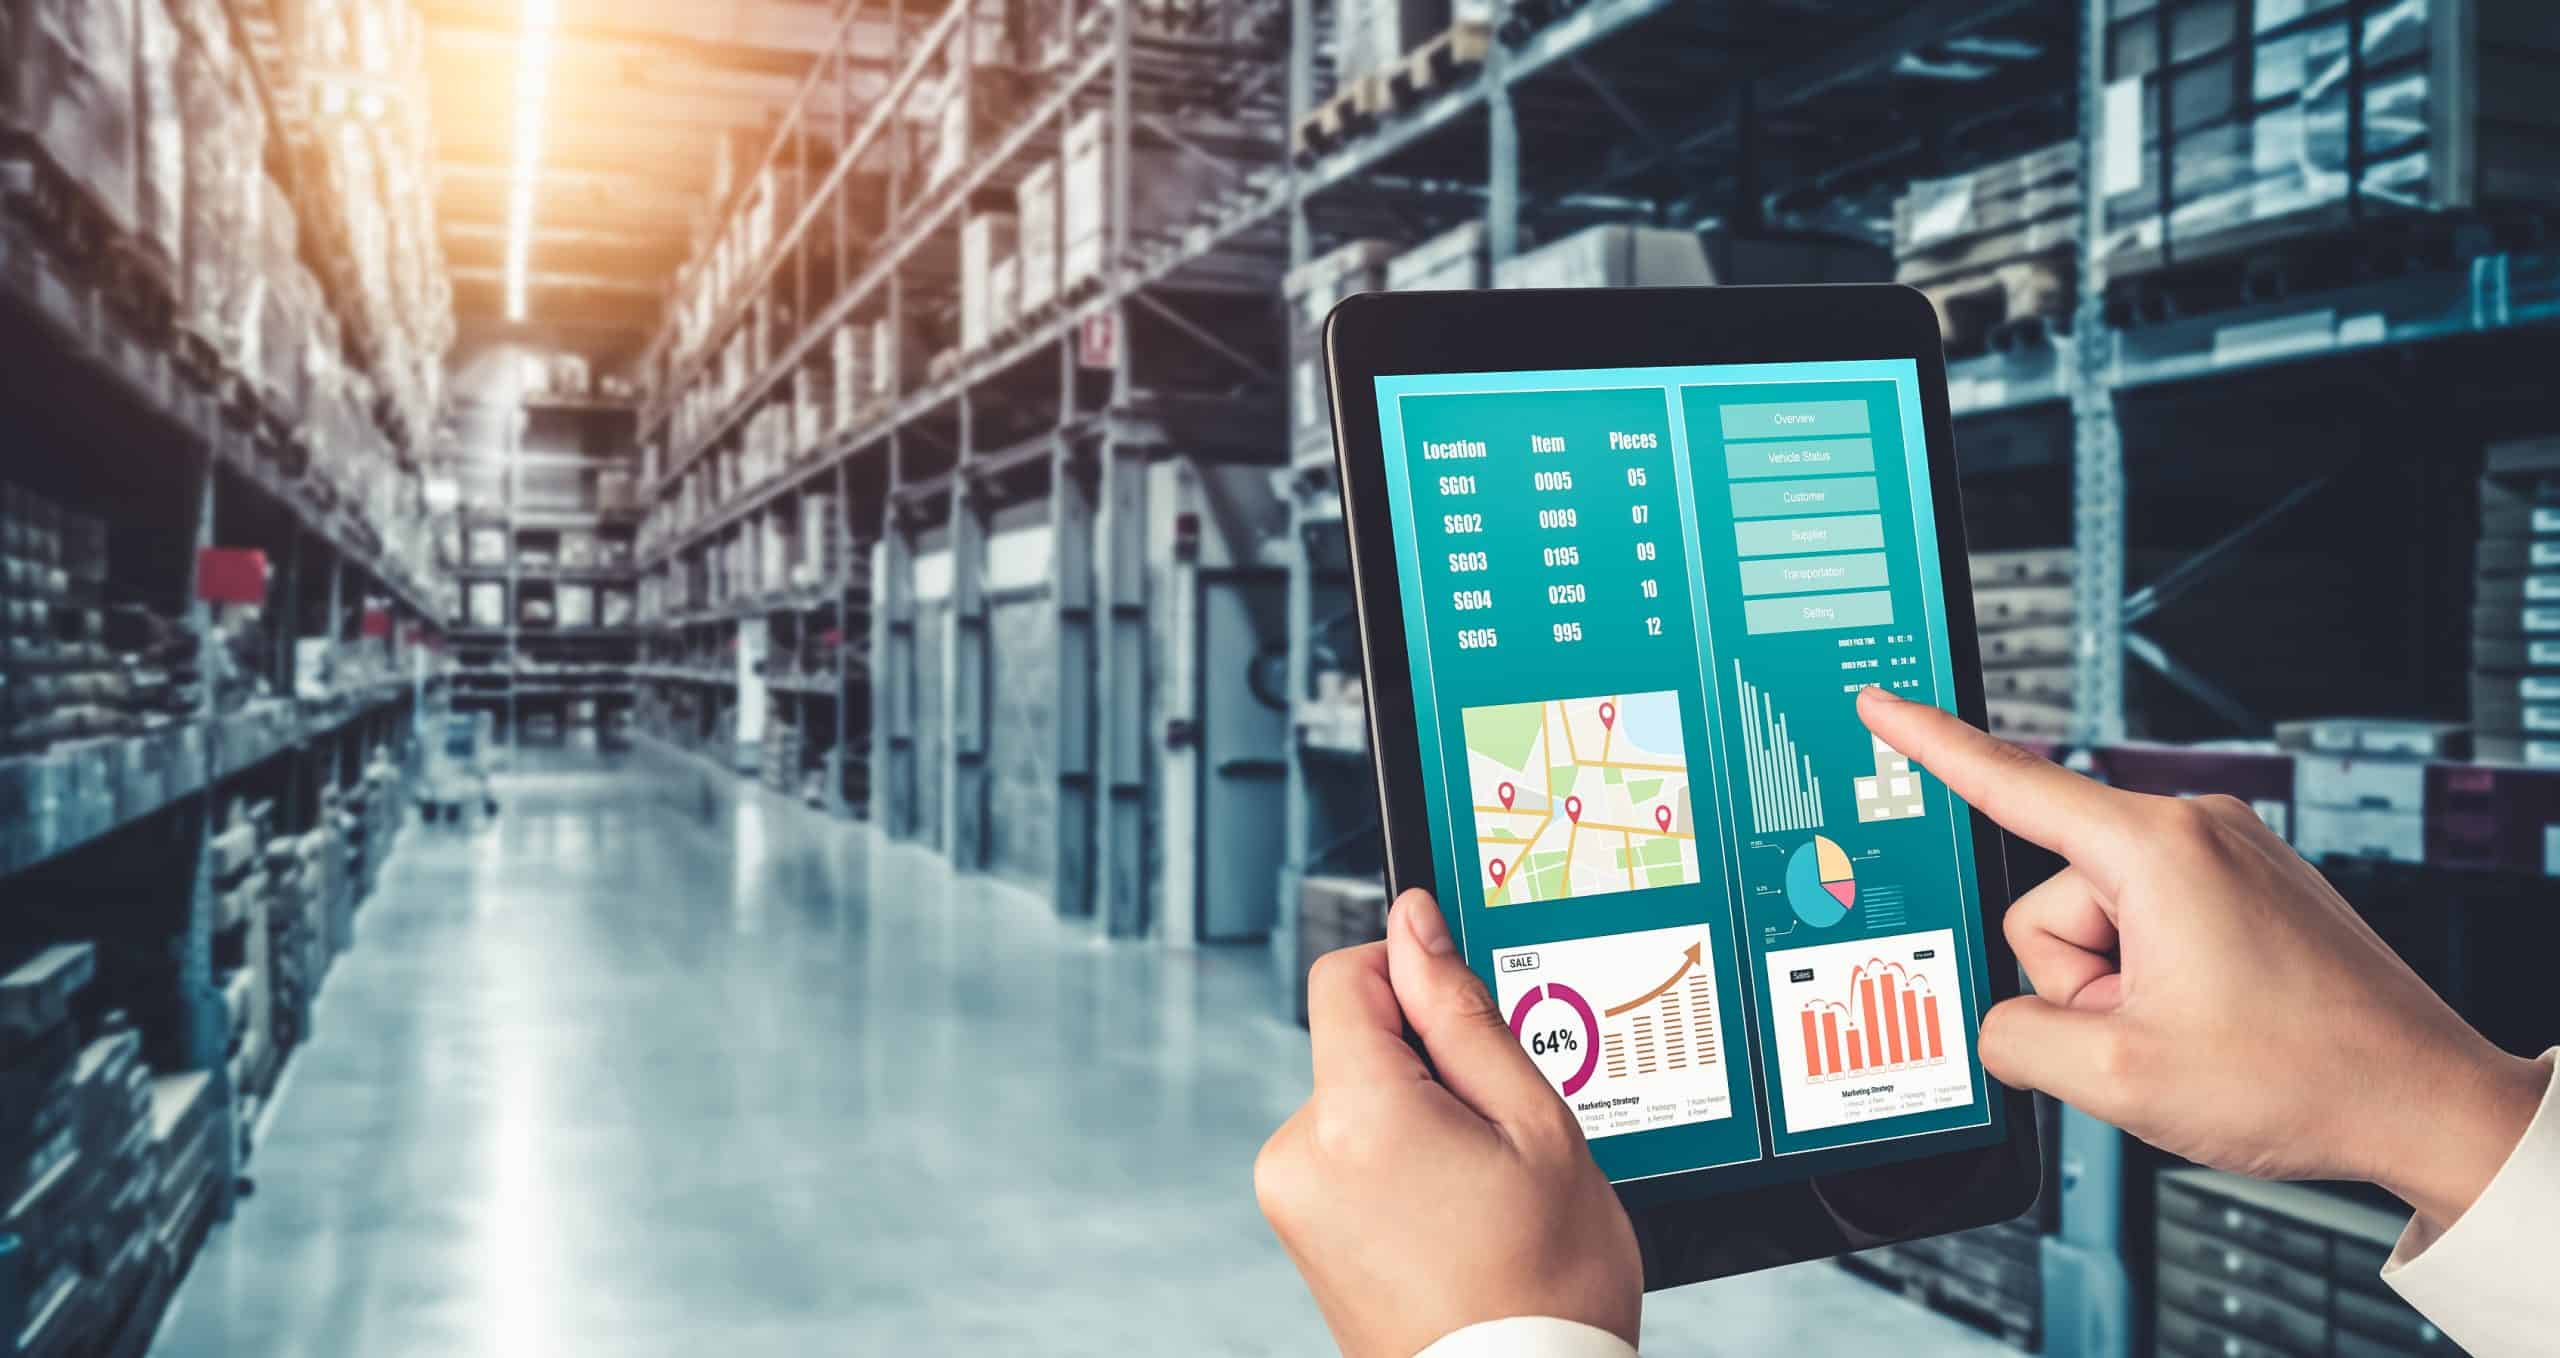 What is Inventory Management Software?